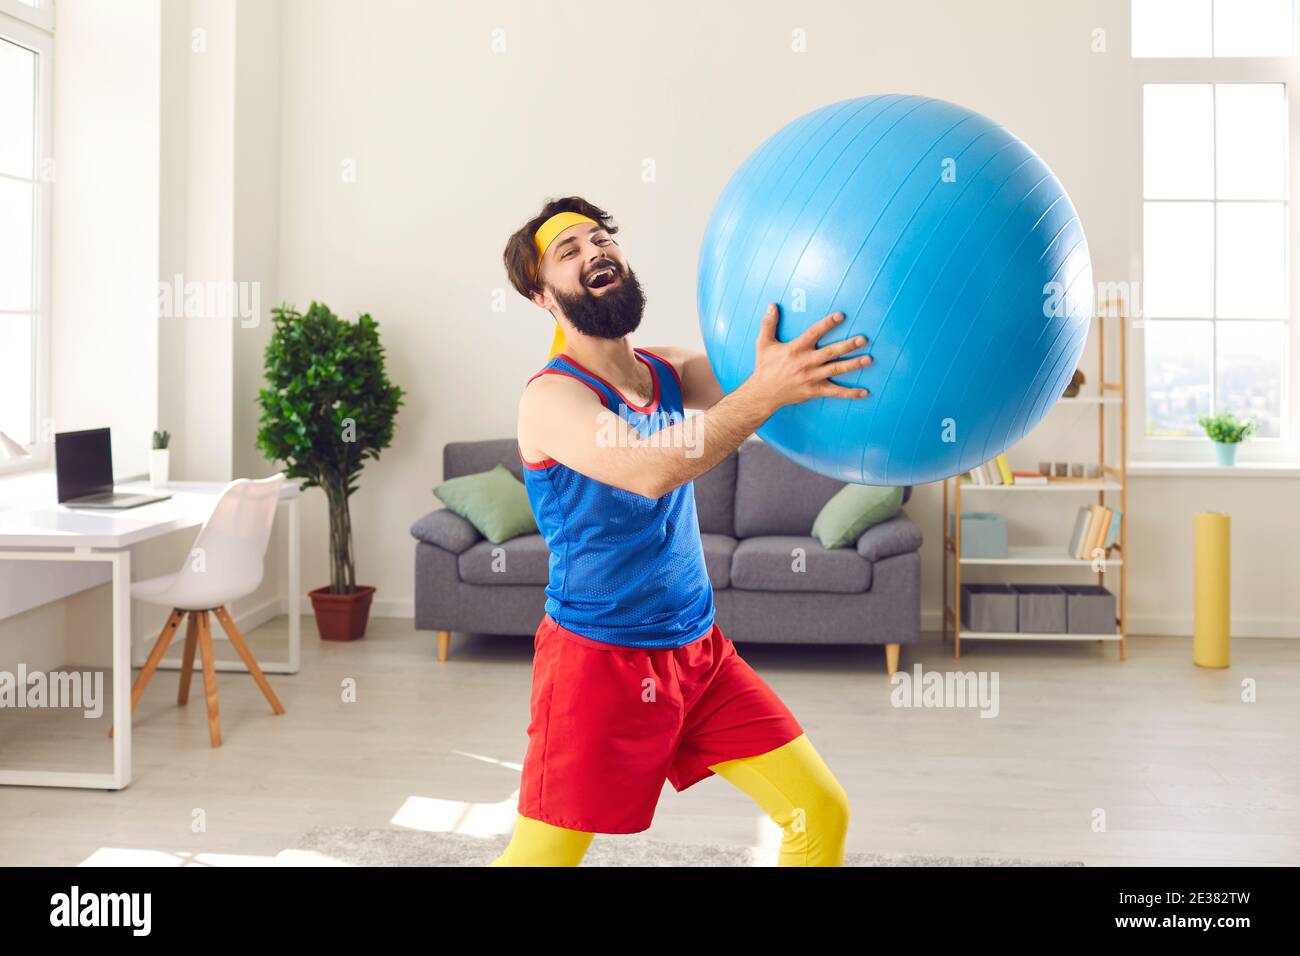 Man in colorful sportswear having fun and lifting a fitness ball during sports training at home. Stock Photo